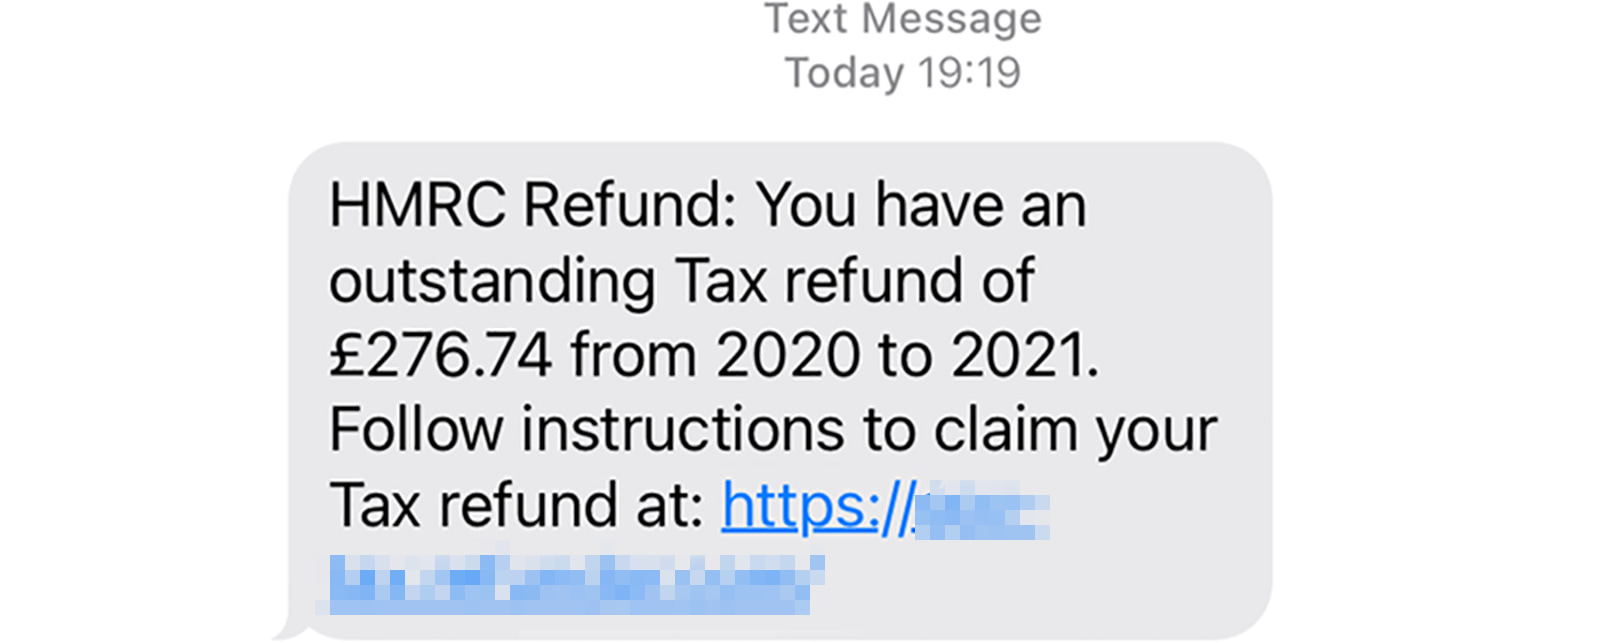 Example of scam HMRC text message